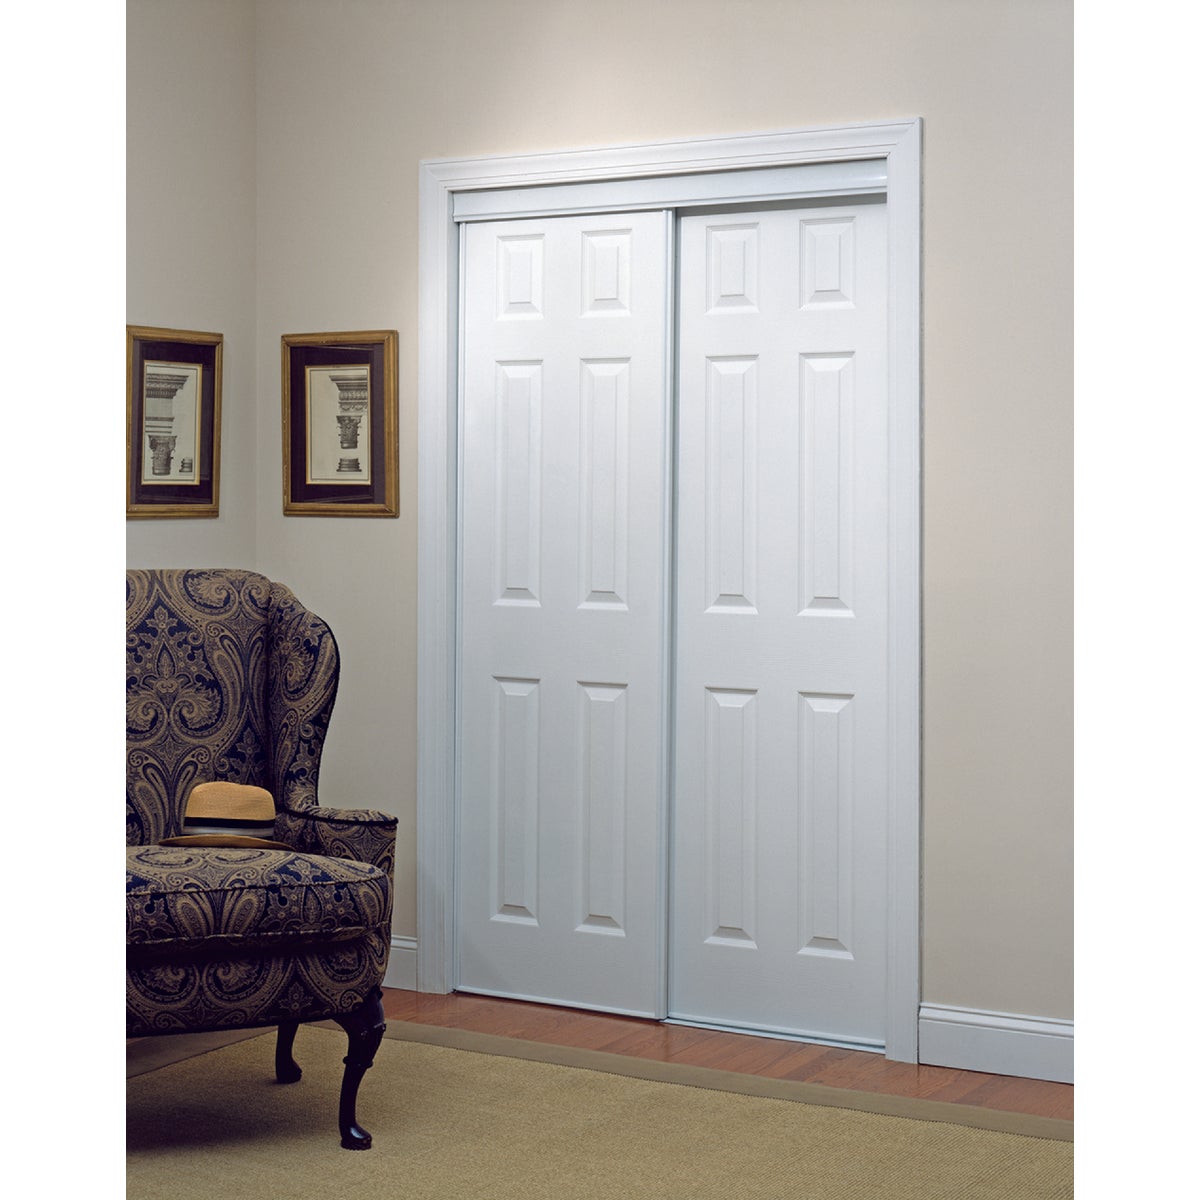 Item 164707, 106 series 6-panel bypass vinyl clad doors have all the appearance of a 